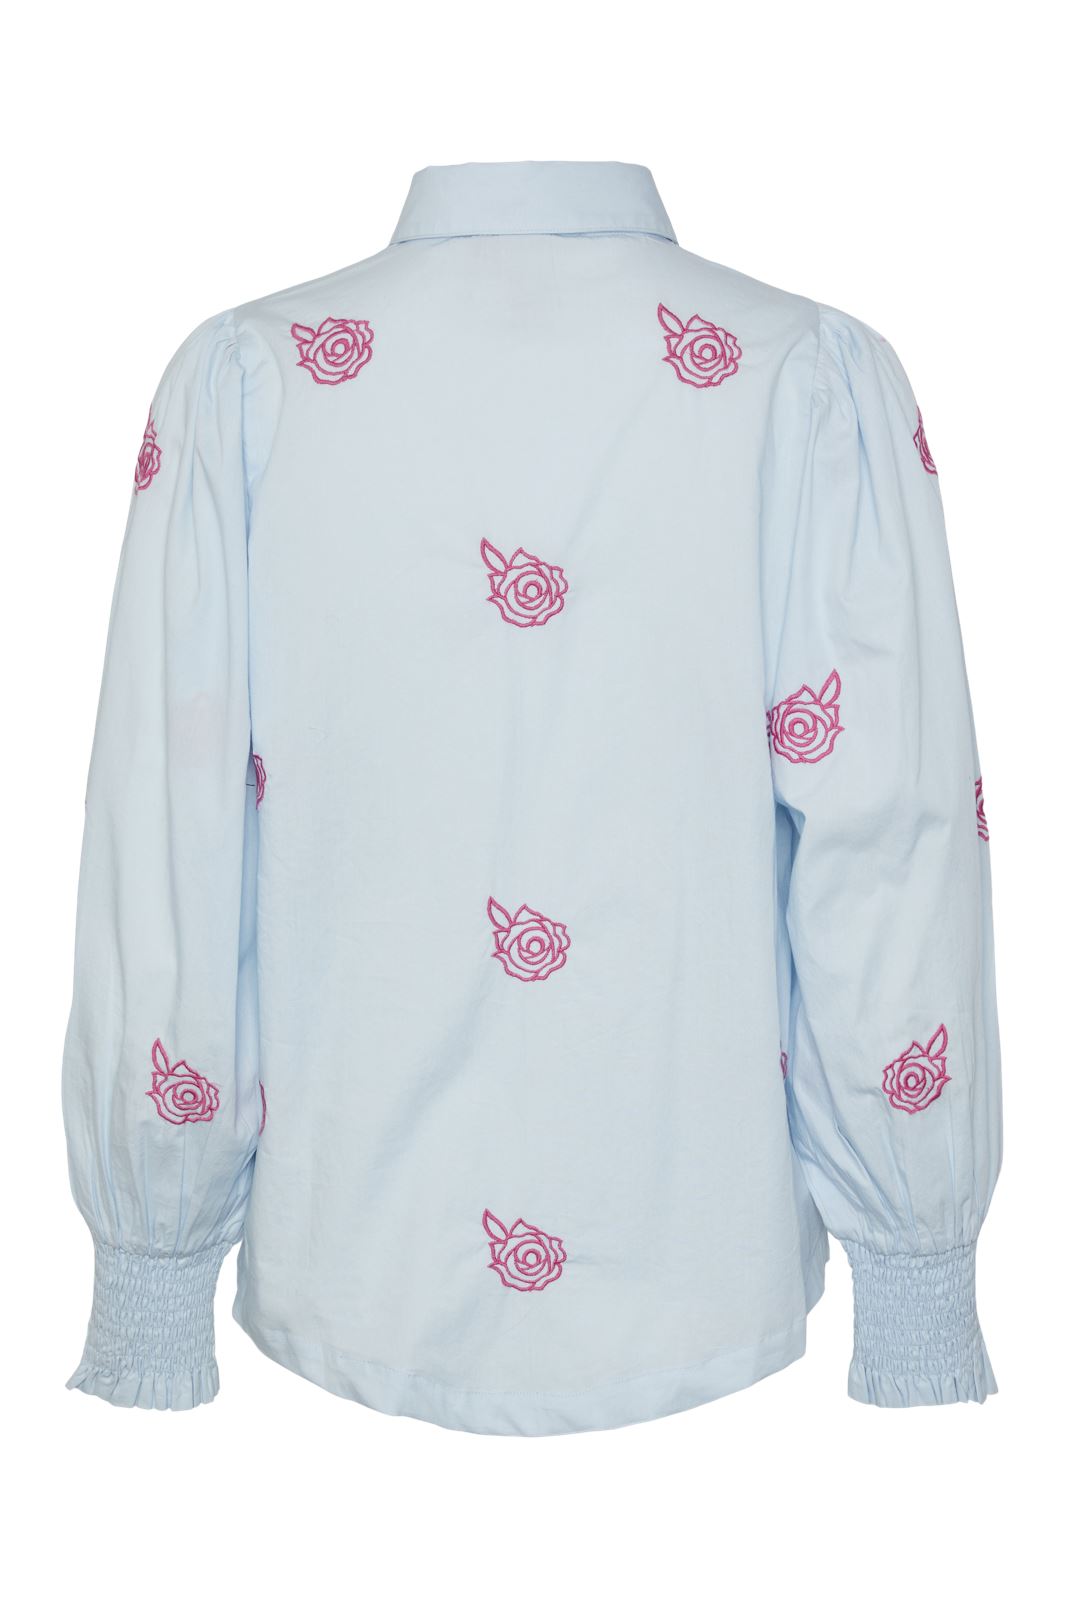 Y.A.S - Yasbella Ls Shirt - 4431603 Omphalodes W. Embroidery